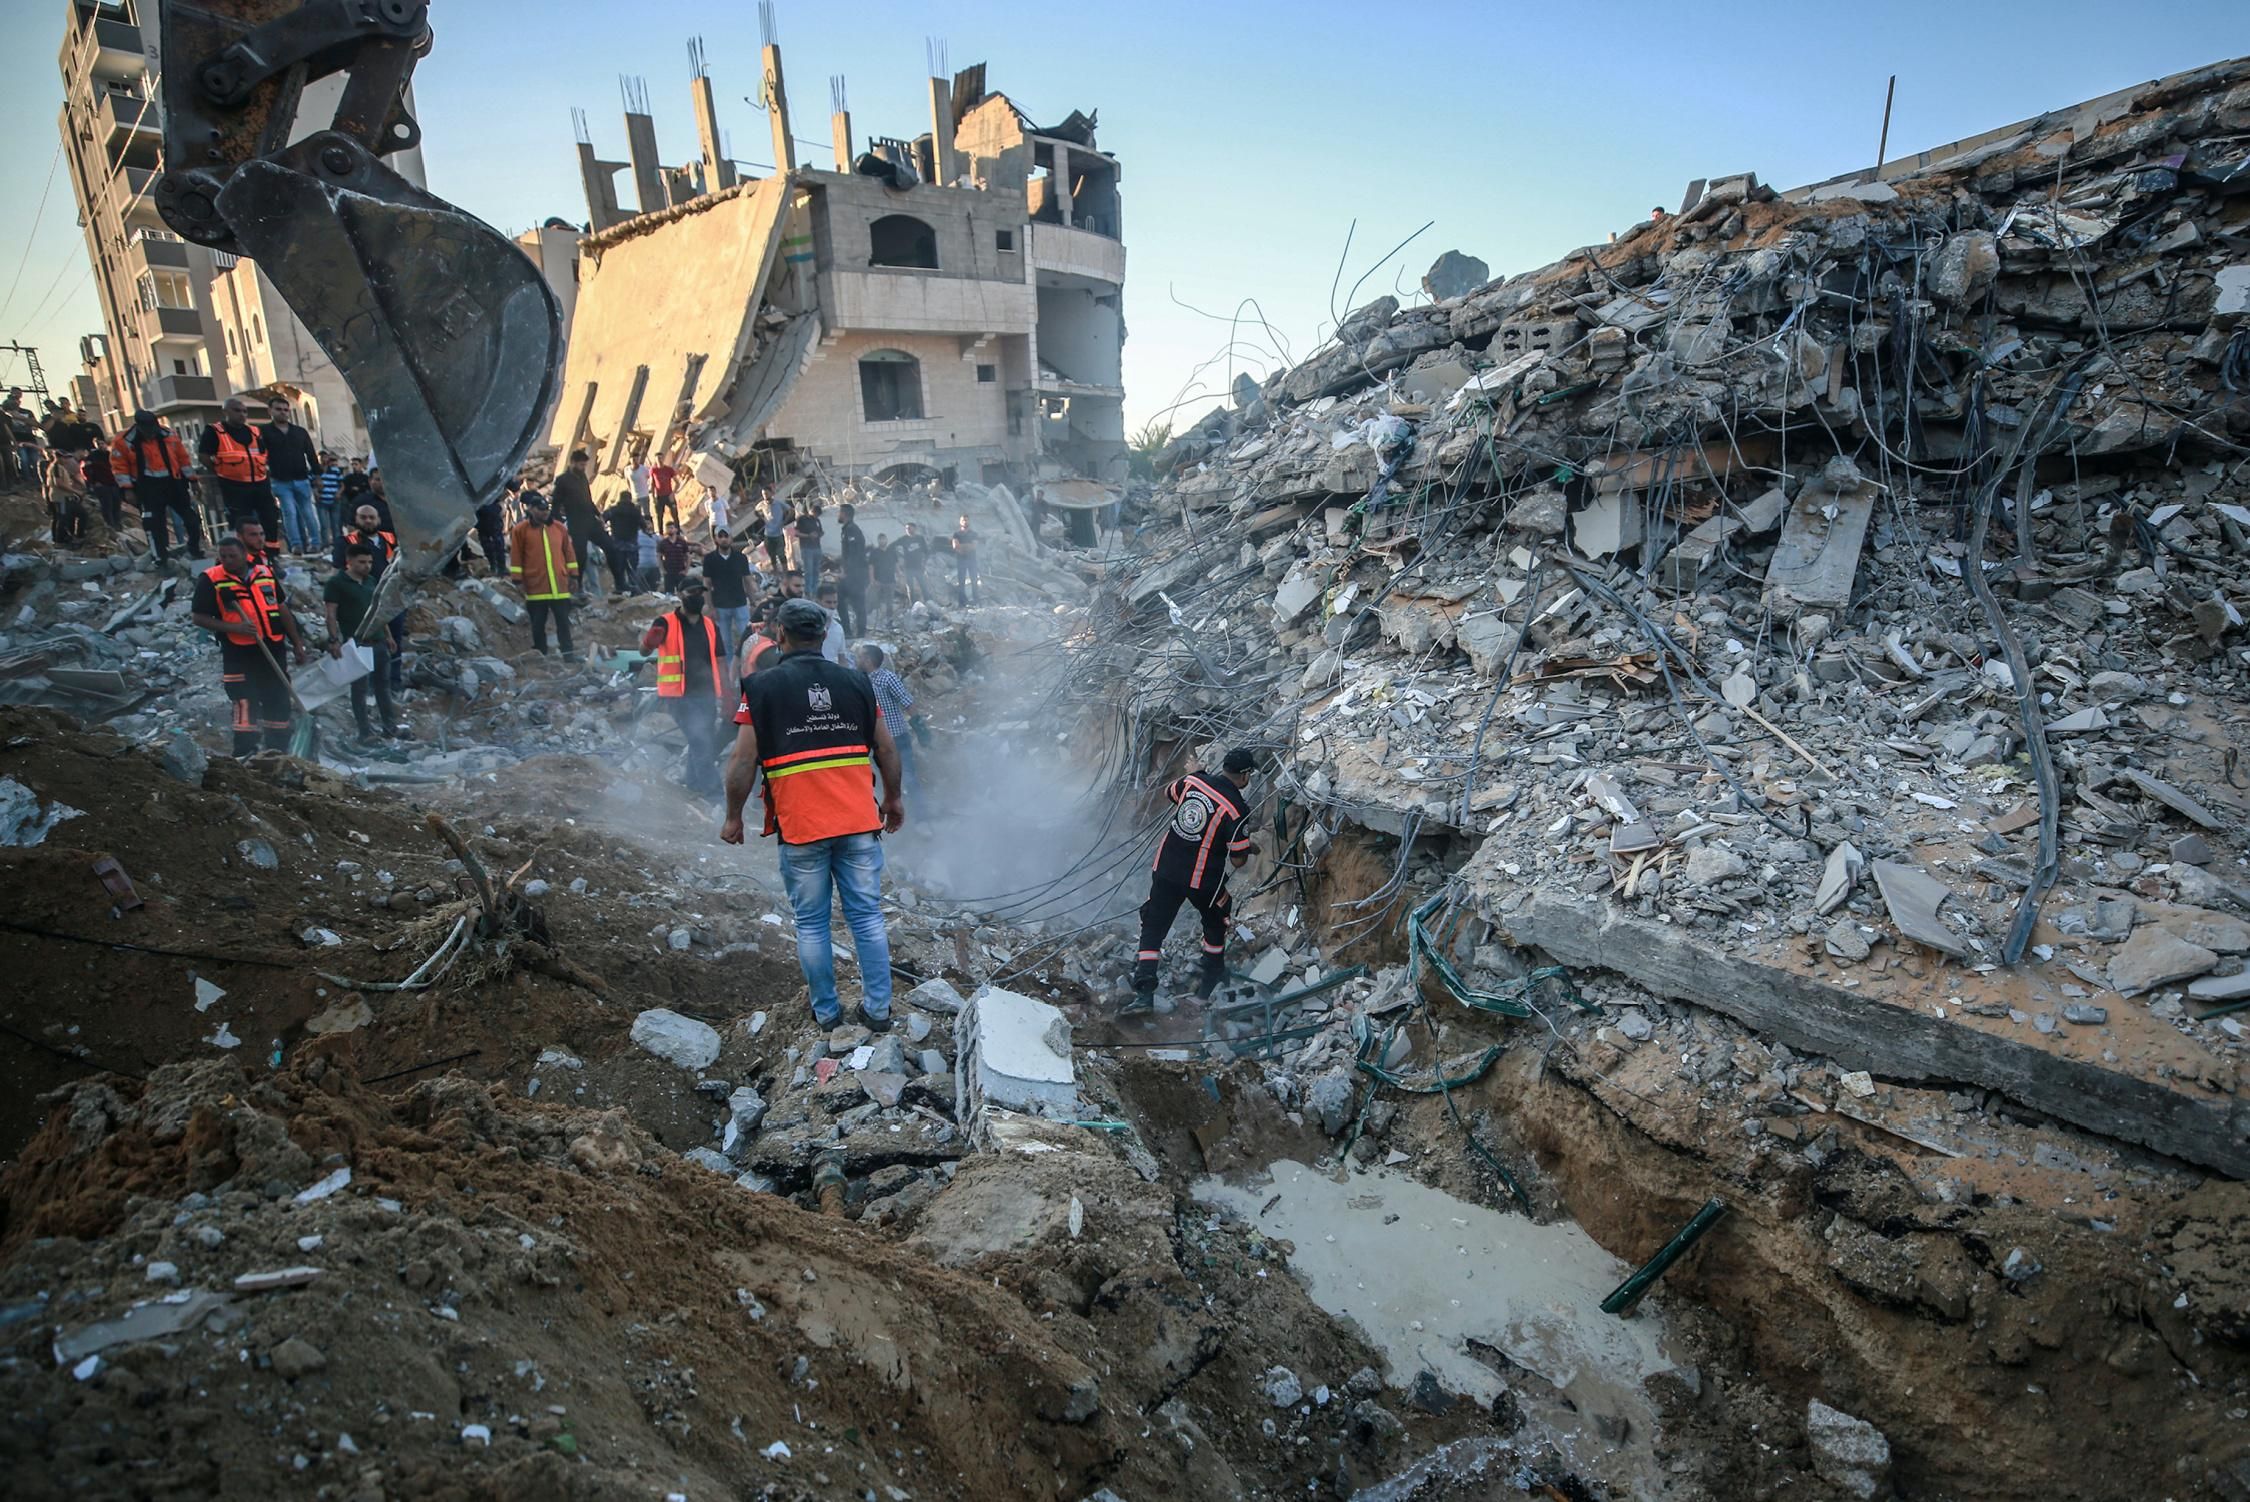 Palestinian first responders search through the rubble of a family's home in Beit Lahia, Gaza following Israeli bombing on May 13, 2021. The body of a child—one of at least 27 killed by Israeli bombing—was recovered from the home's ruins. (Photo: Mustafa Hassona/Andalou Agency via Getty Images)